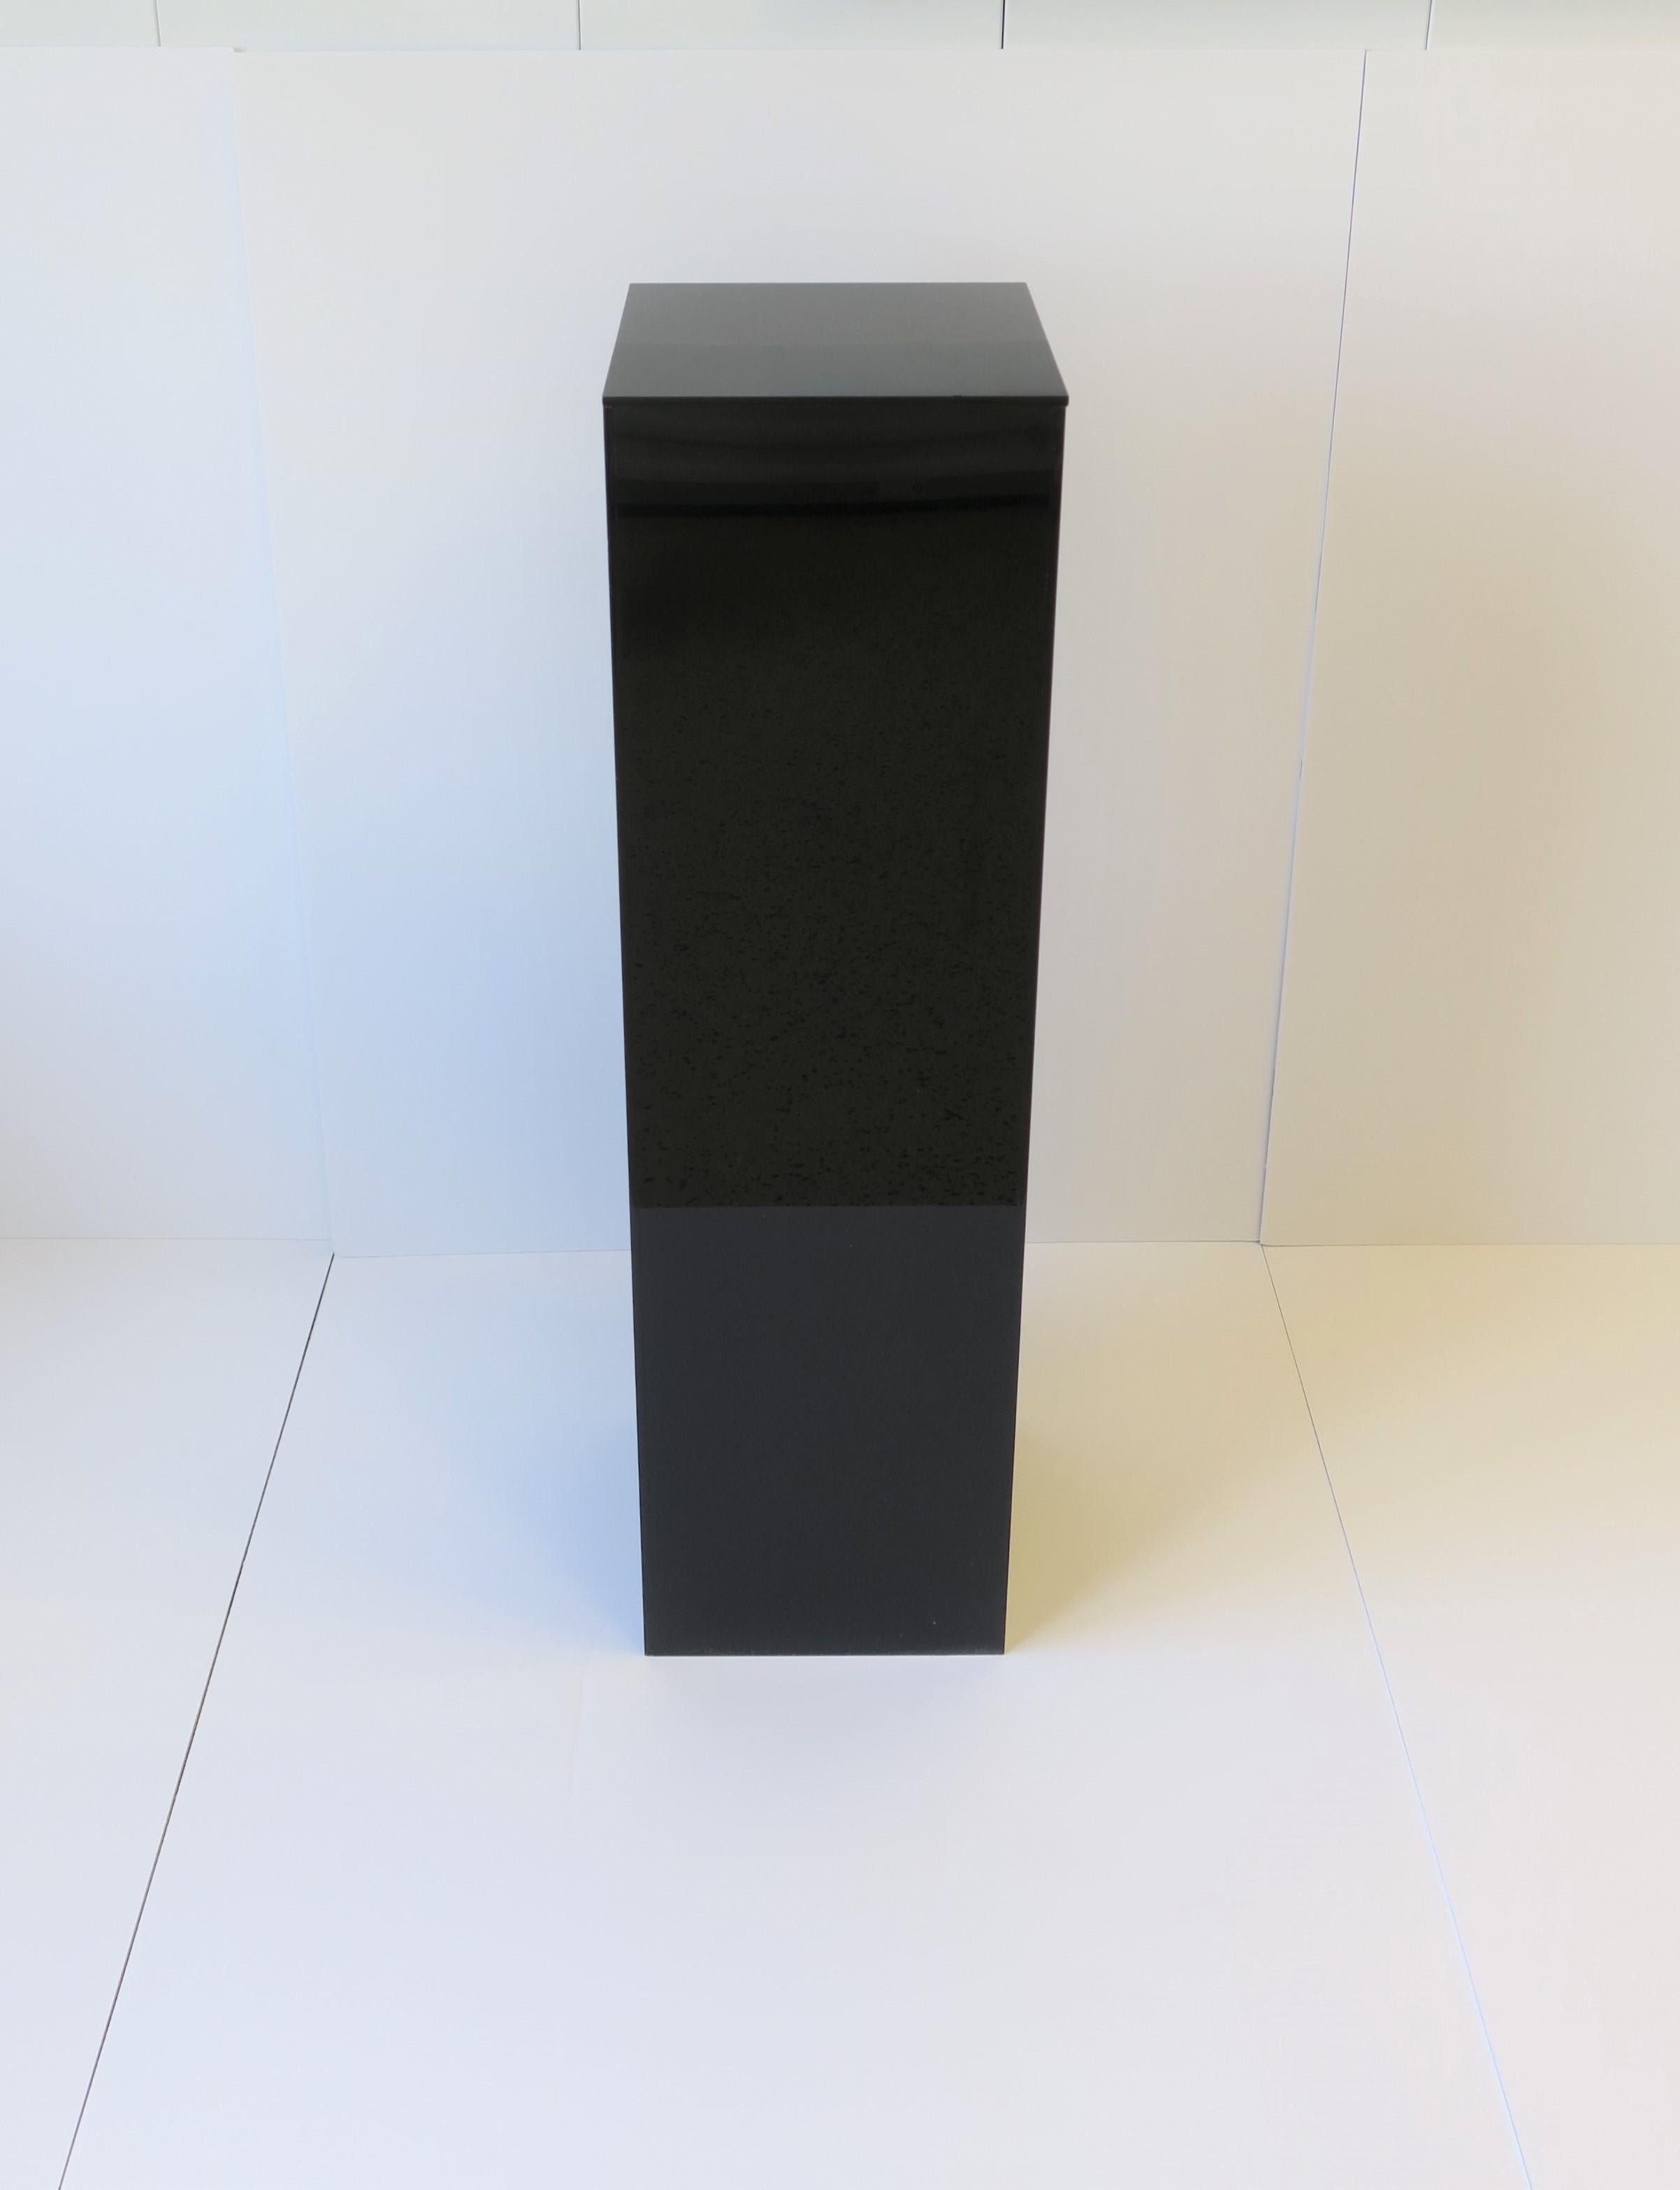 A tall rectangular black acrylic pedestal column stand display piece for items such as art, sculpture, jewelry, plant and more. 

Measurements include: 10